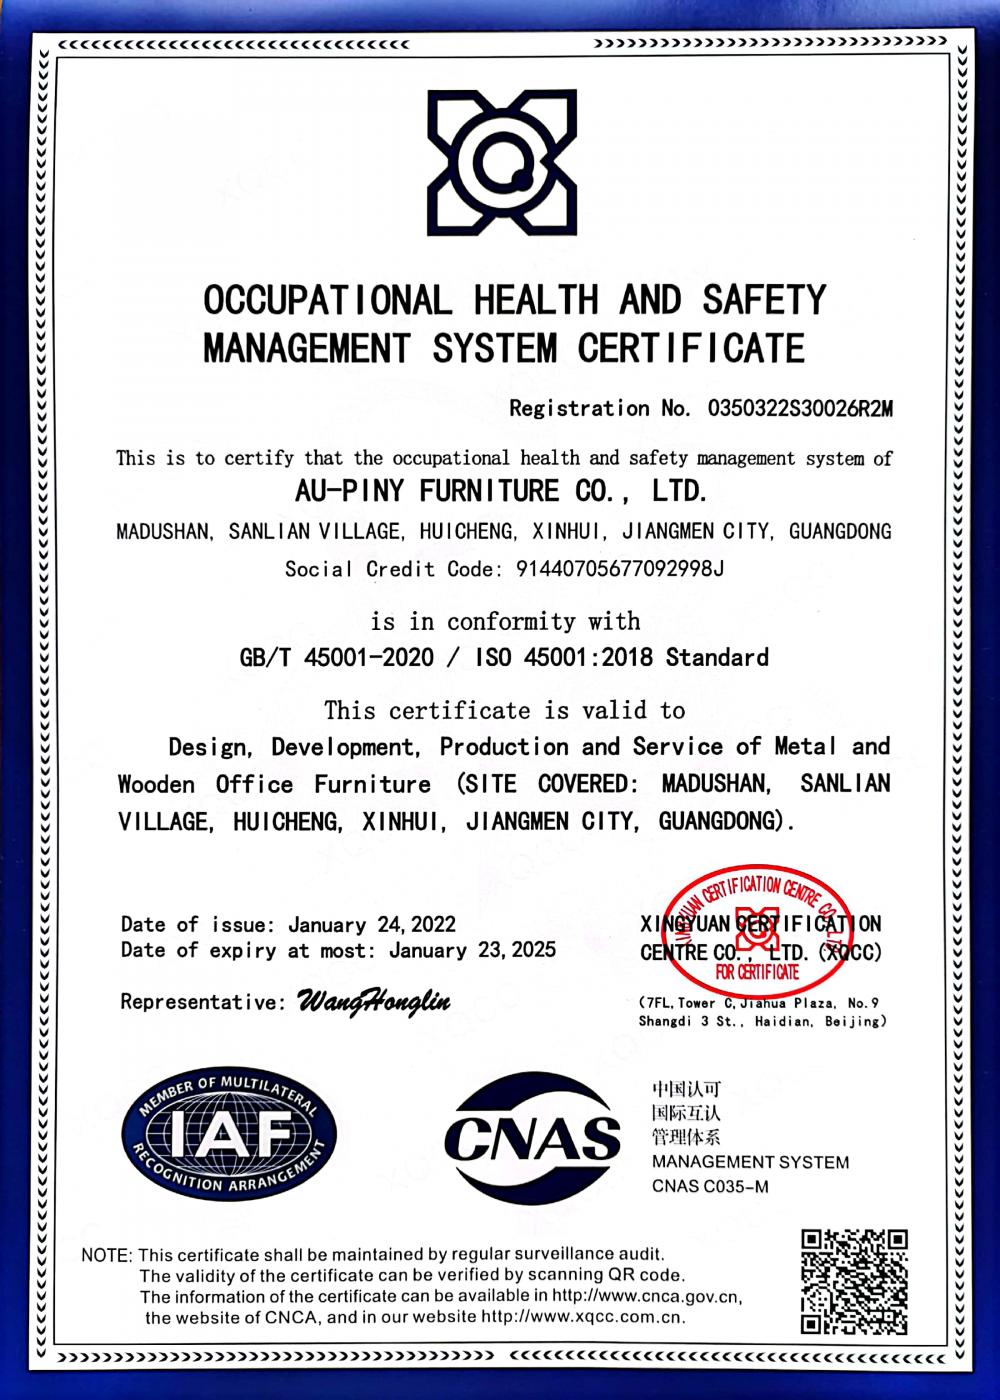 OHSMS Management System Certificate